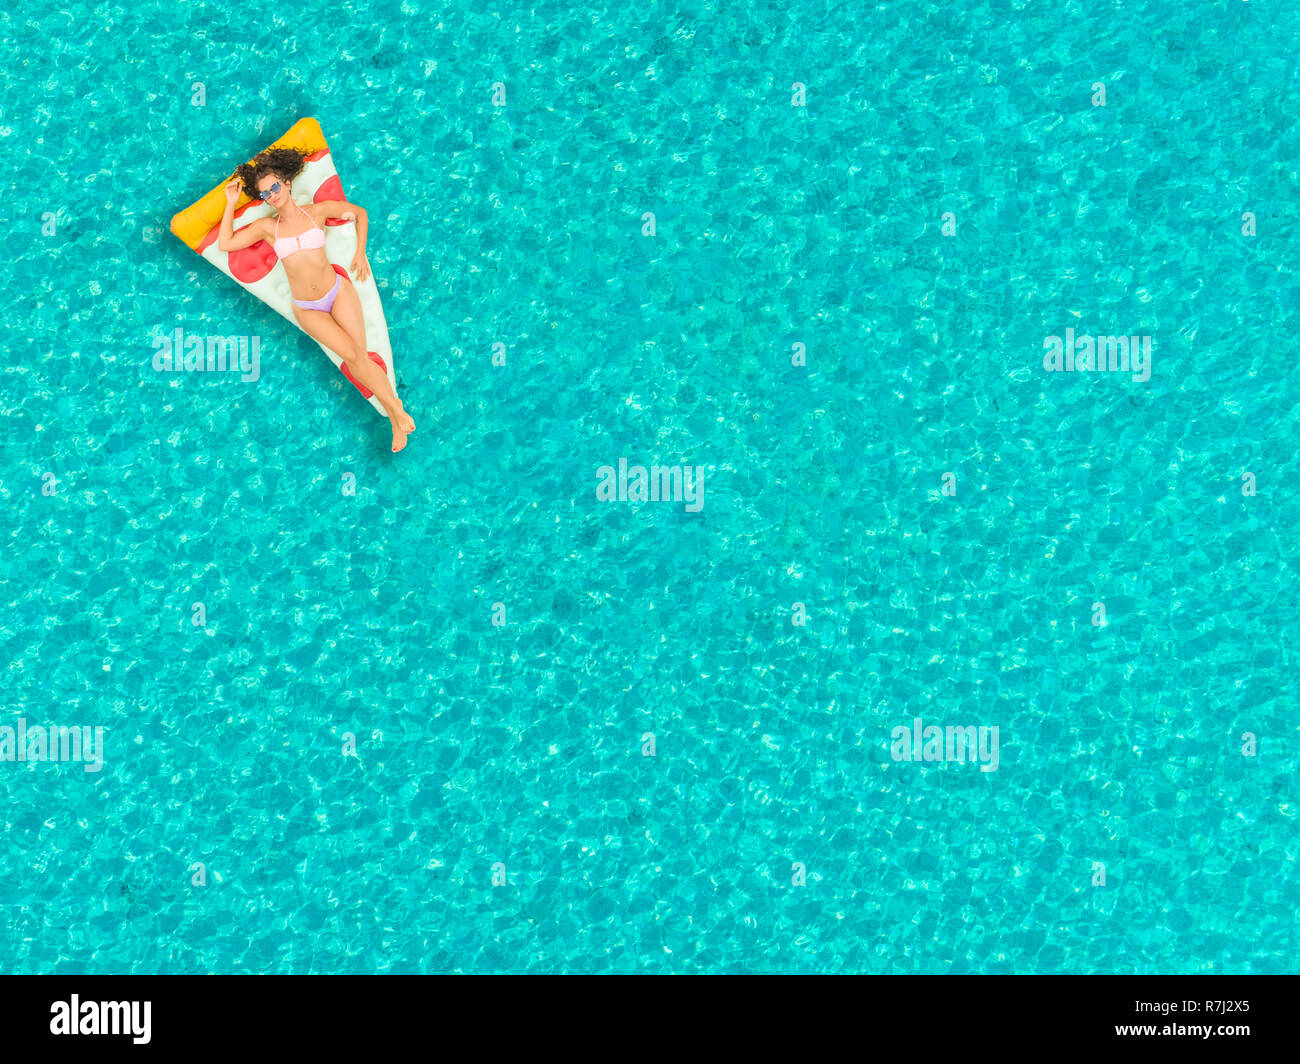 Aerial view of woman floating on inflatable pizza mattress, relaxing and smiling. Stock Photo